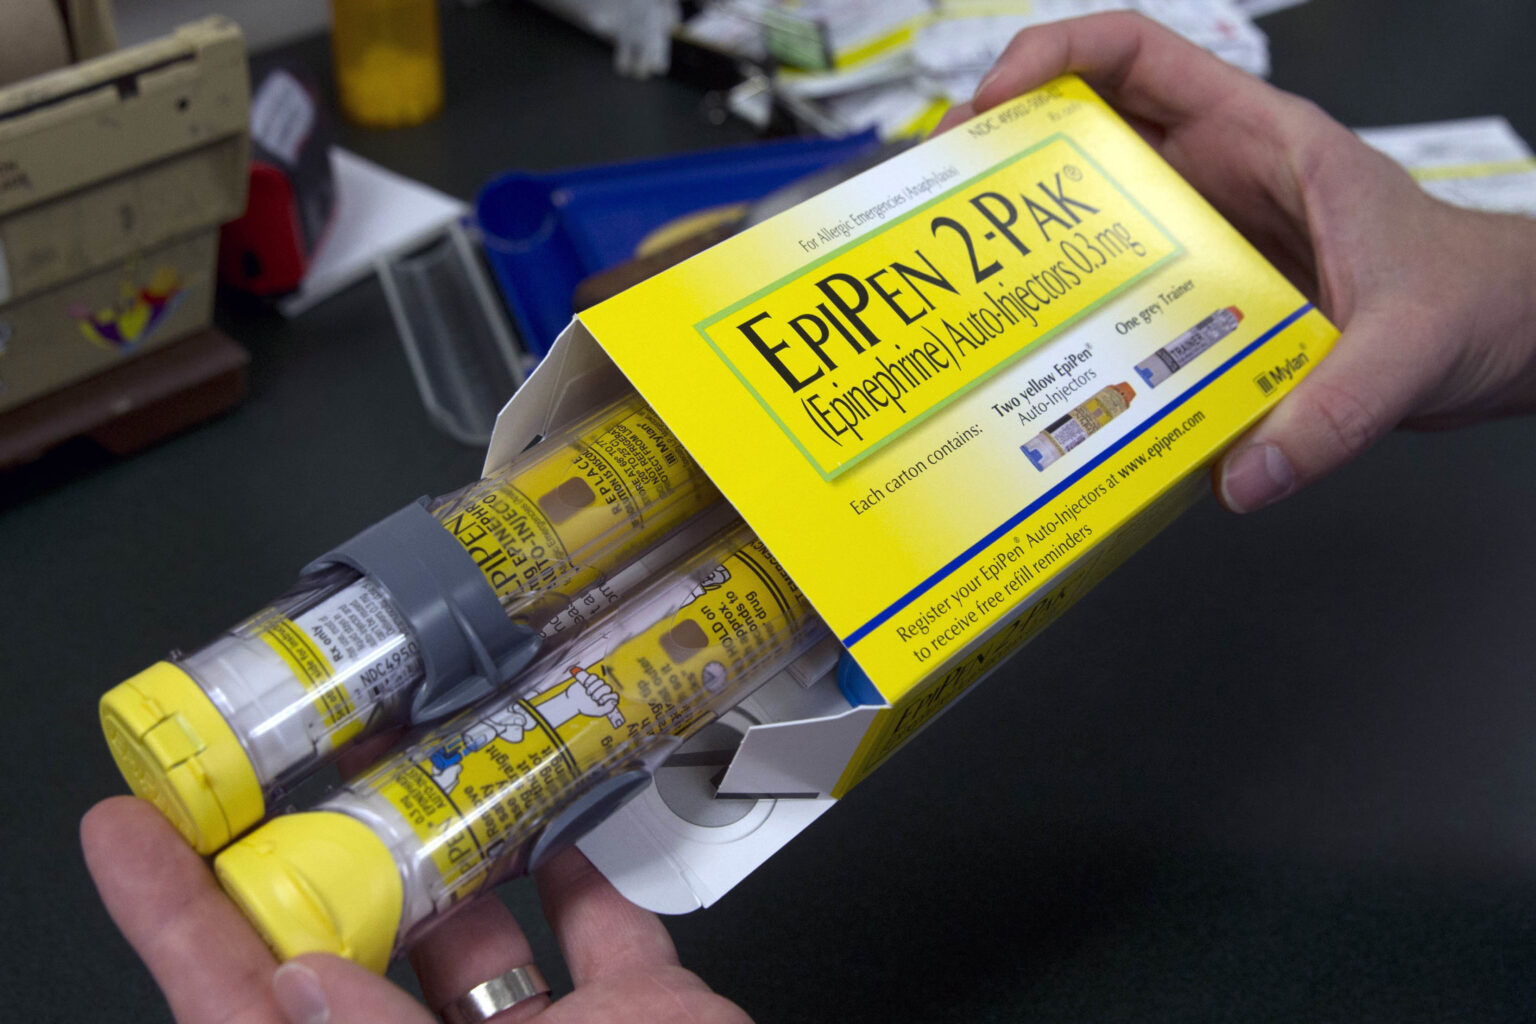 Pfizer agrees to 345M settlement in EpiPen antitrust class action